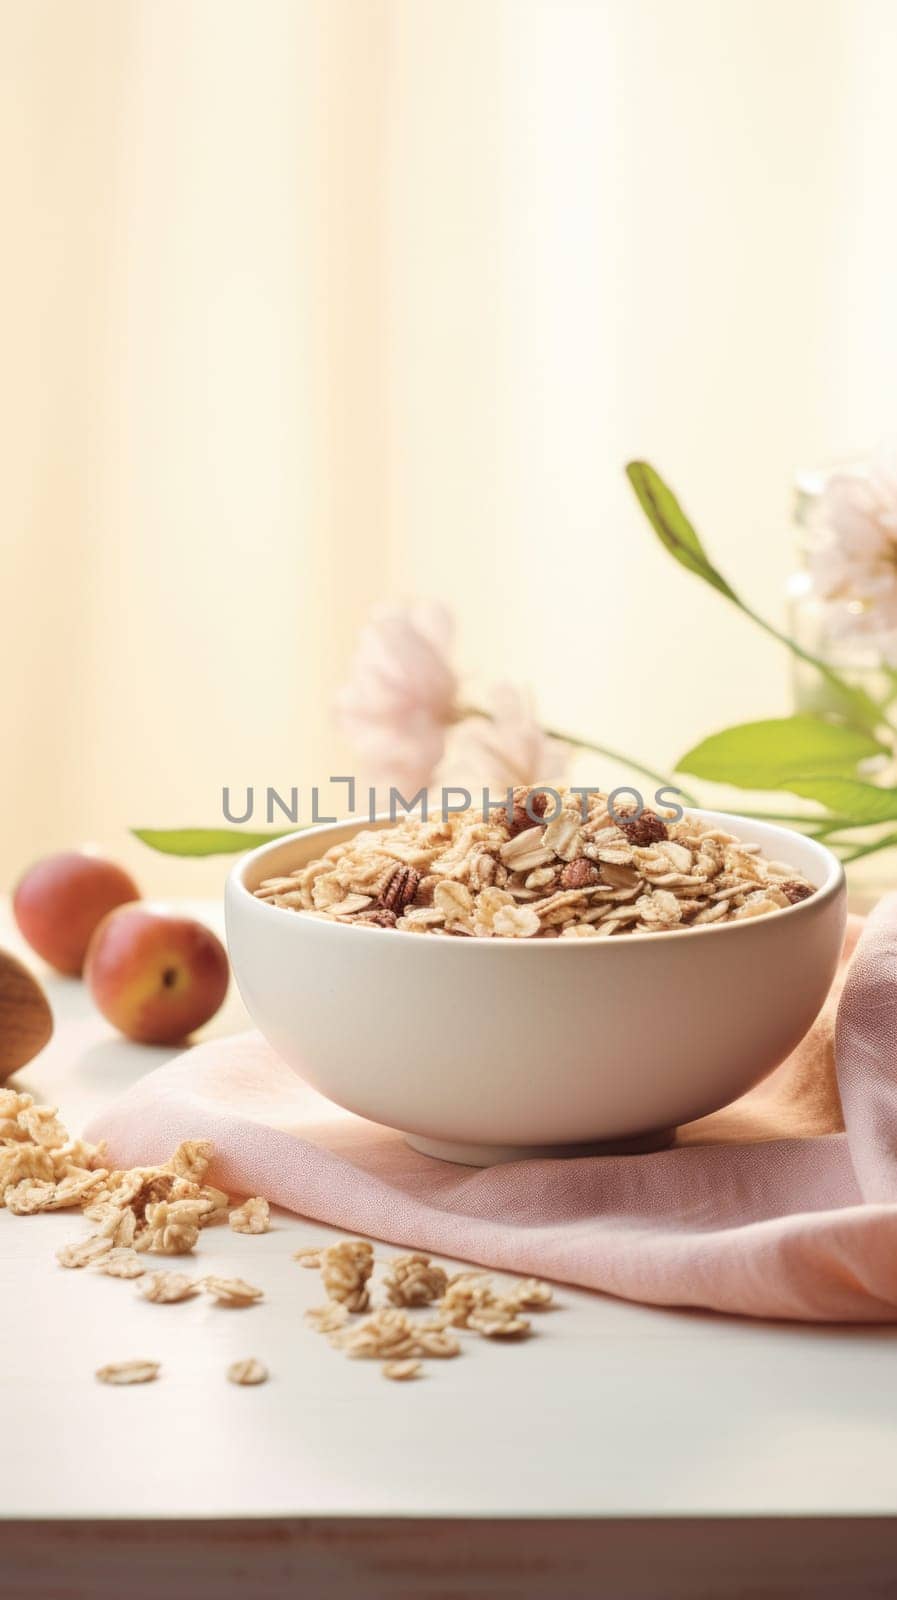 Cereal with almonds and apricots on a table